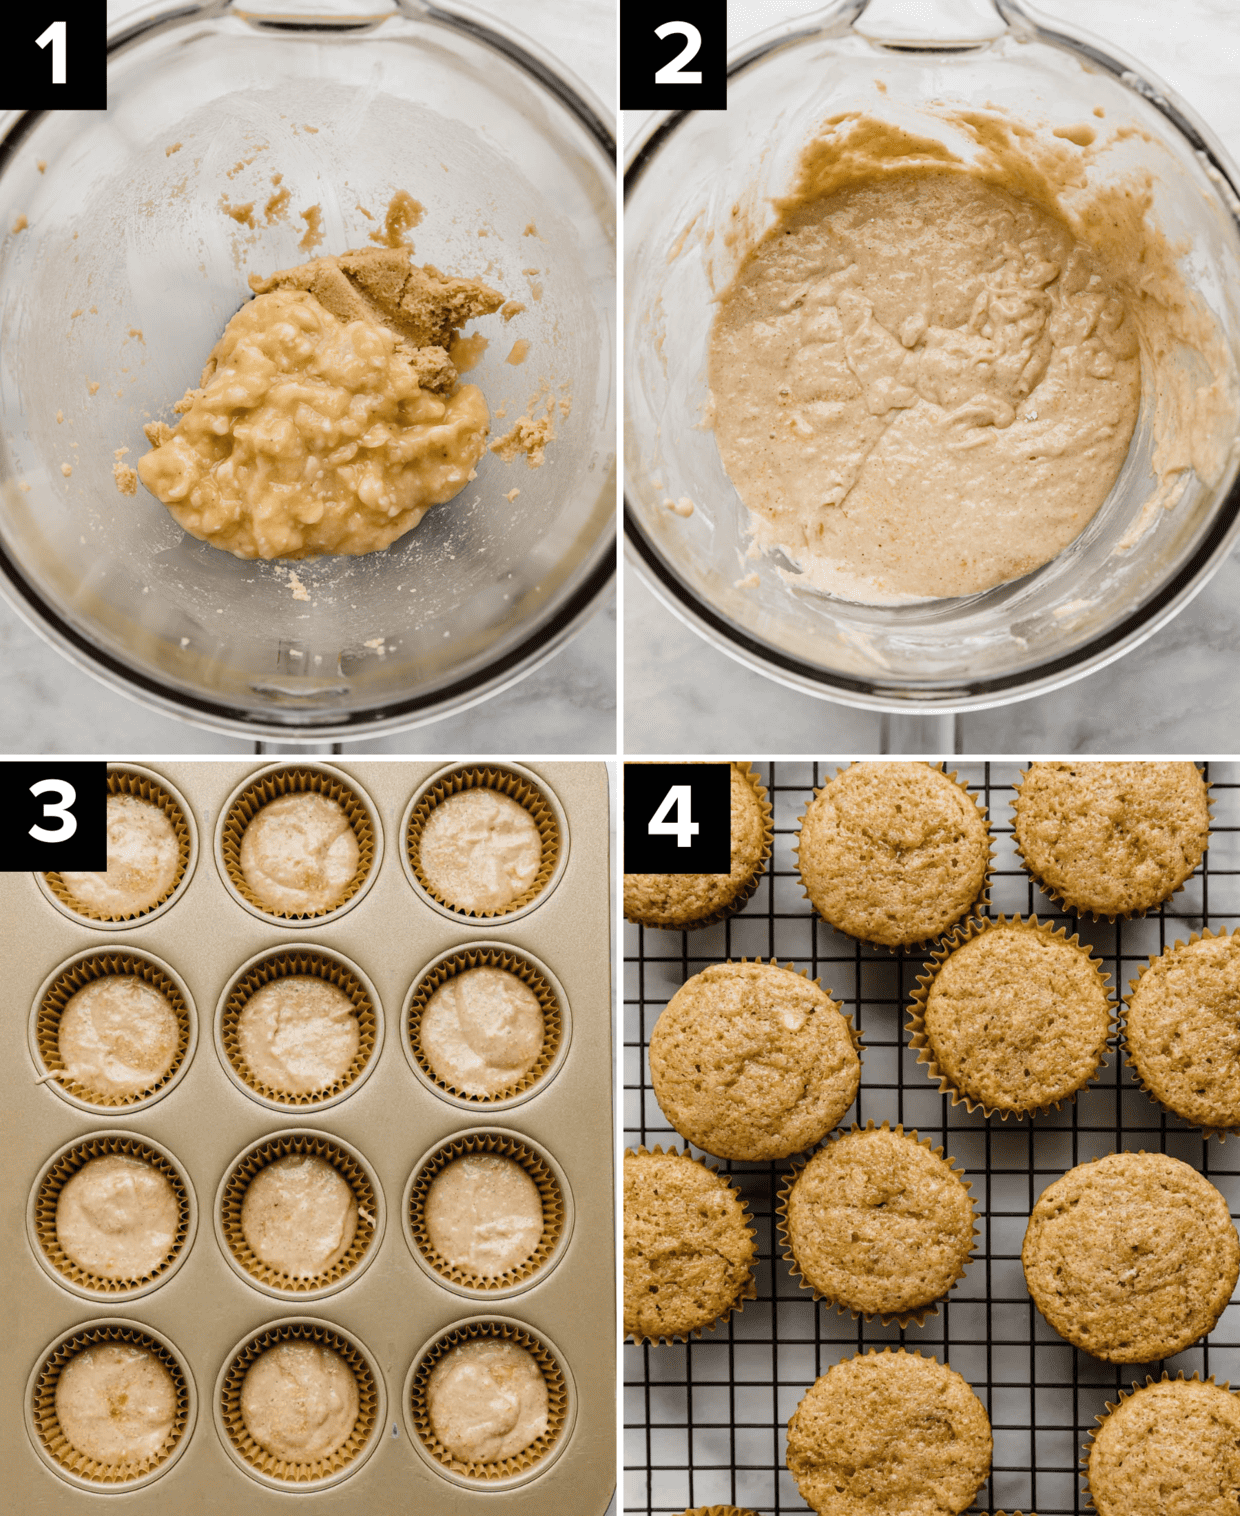 Four images showing how to make banana cupcake batter in a glass bowl, and then the batter is in cupcake liners, then baked.